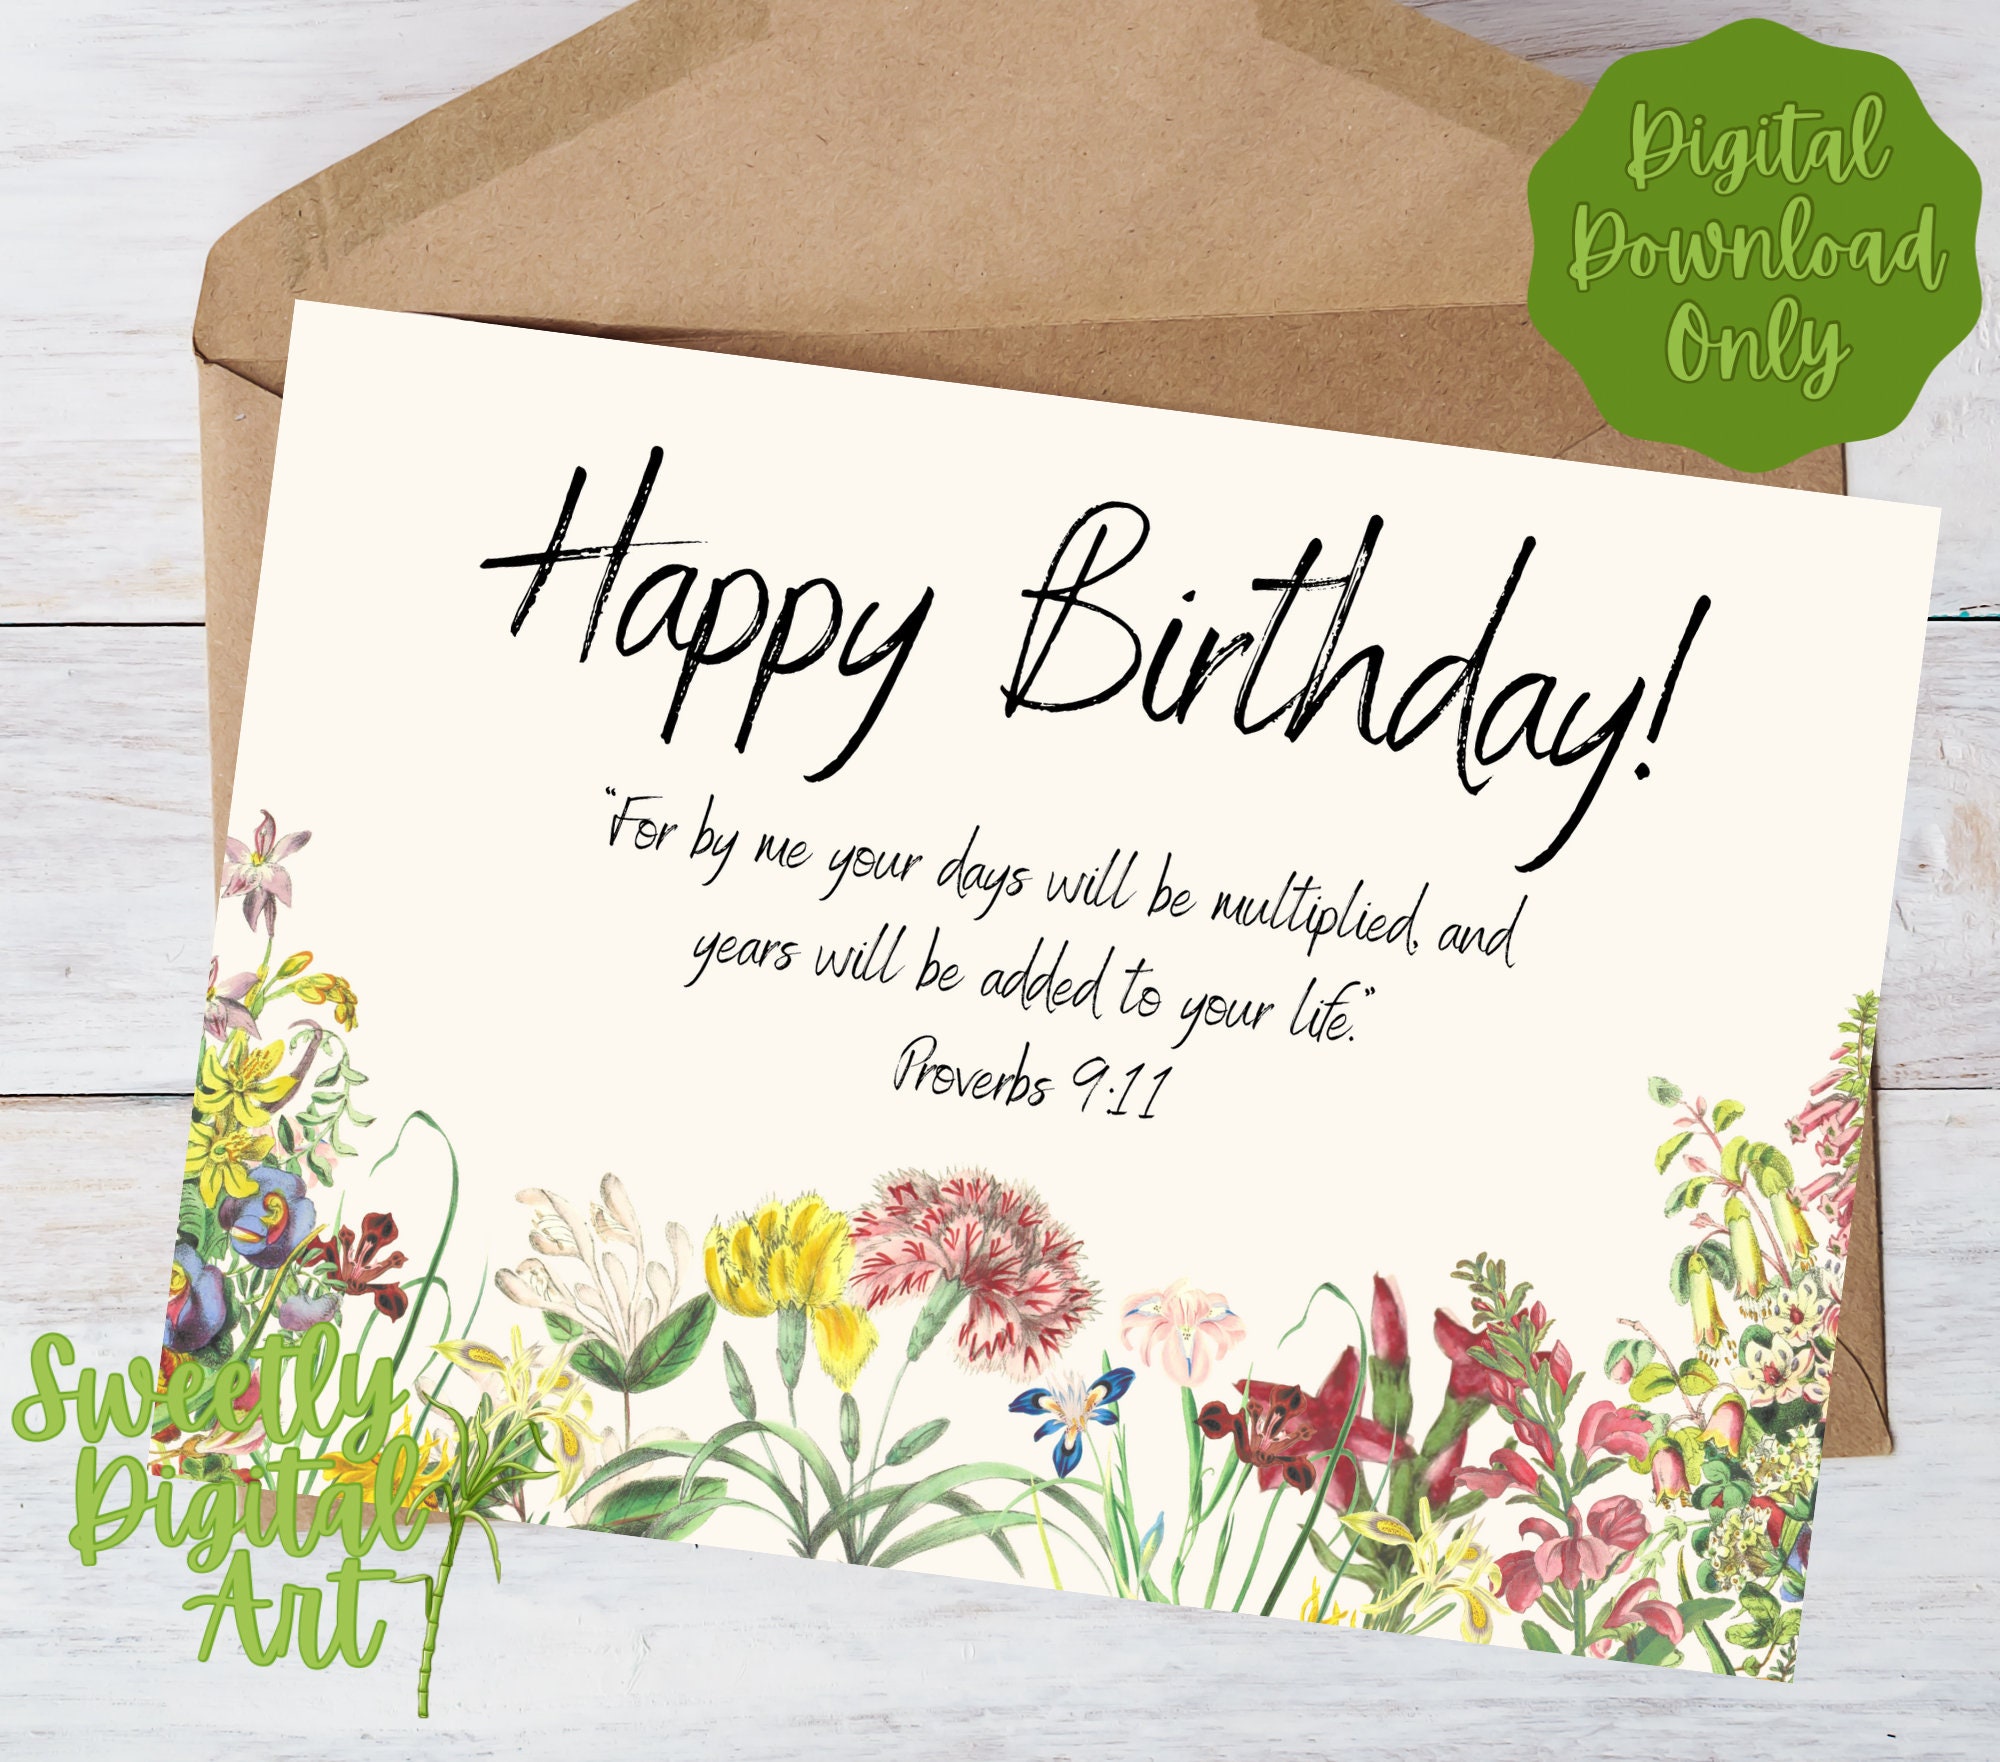 printable-christian-birthday-card-with-bible-verse-happy-etsy